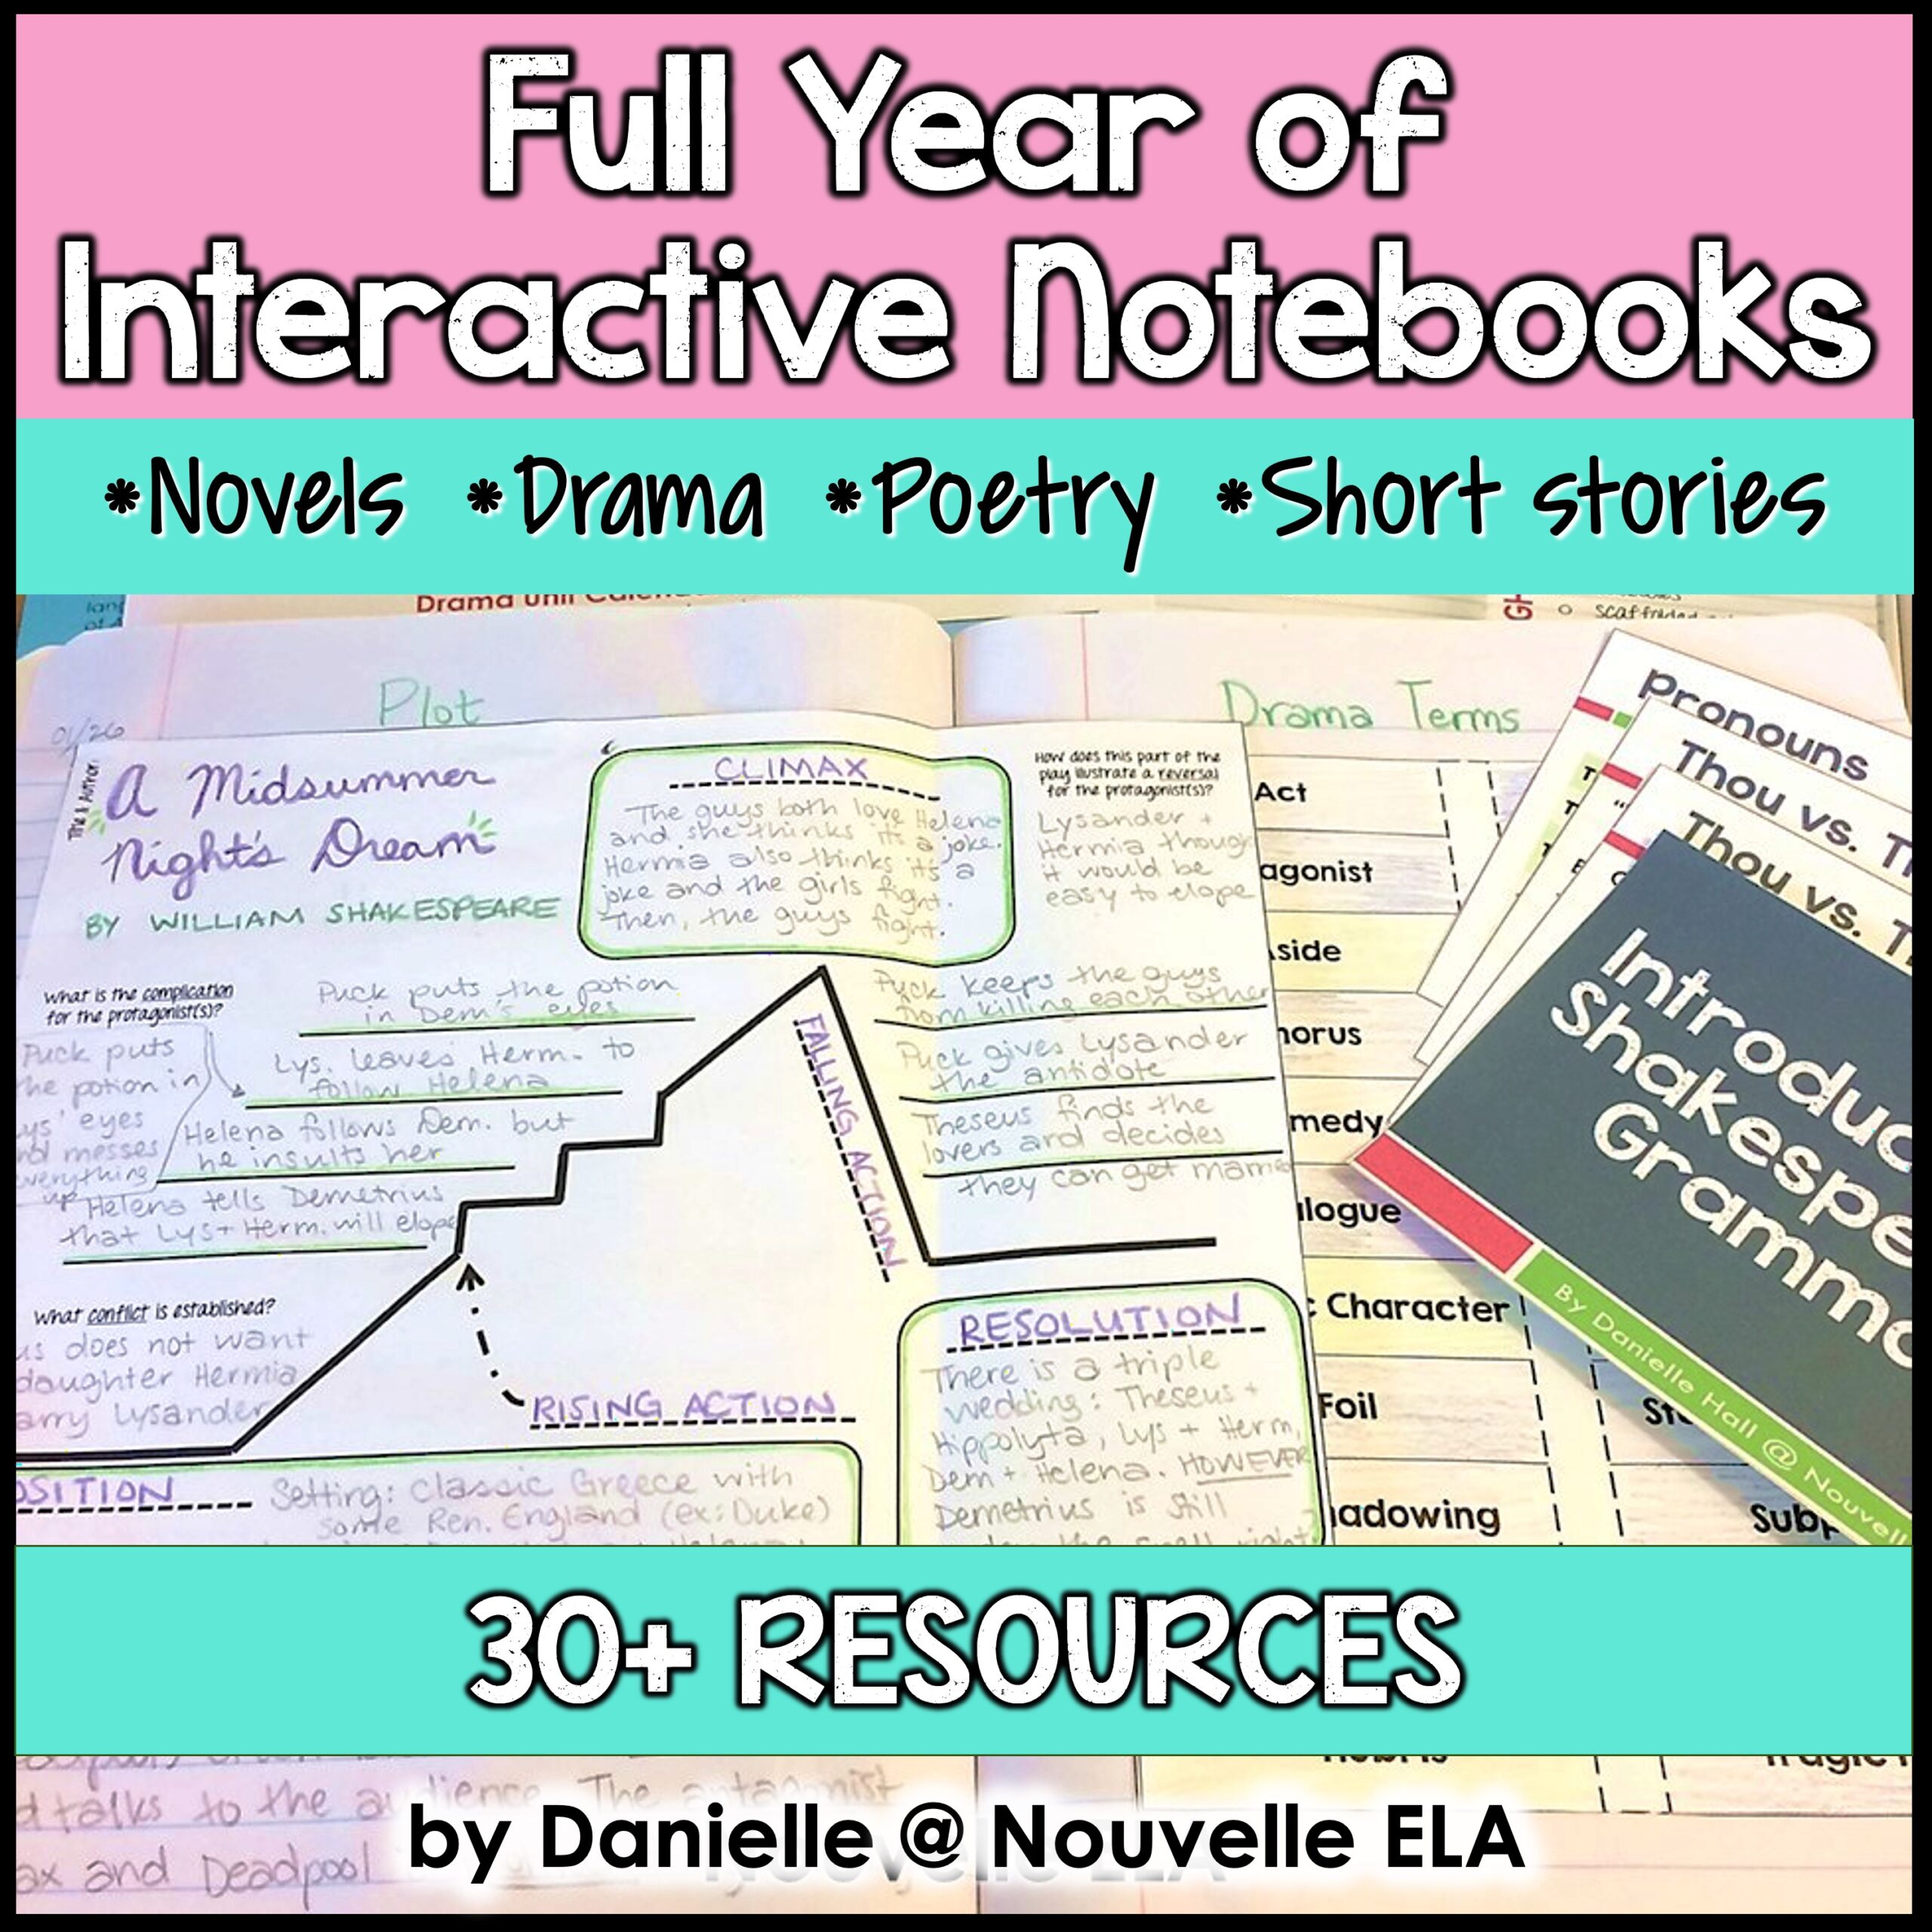 Nouvelle　40+　Teaching　for　ELA　effective　Resources　resources　Notebooks　Yearlong　Secondary　of　ELA　Interactive　Bundle